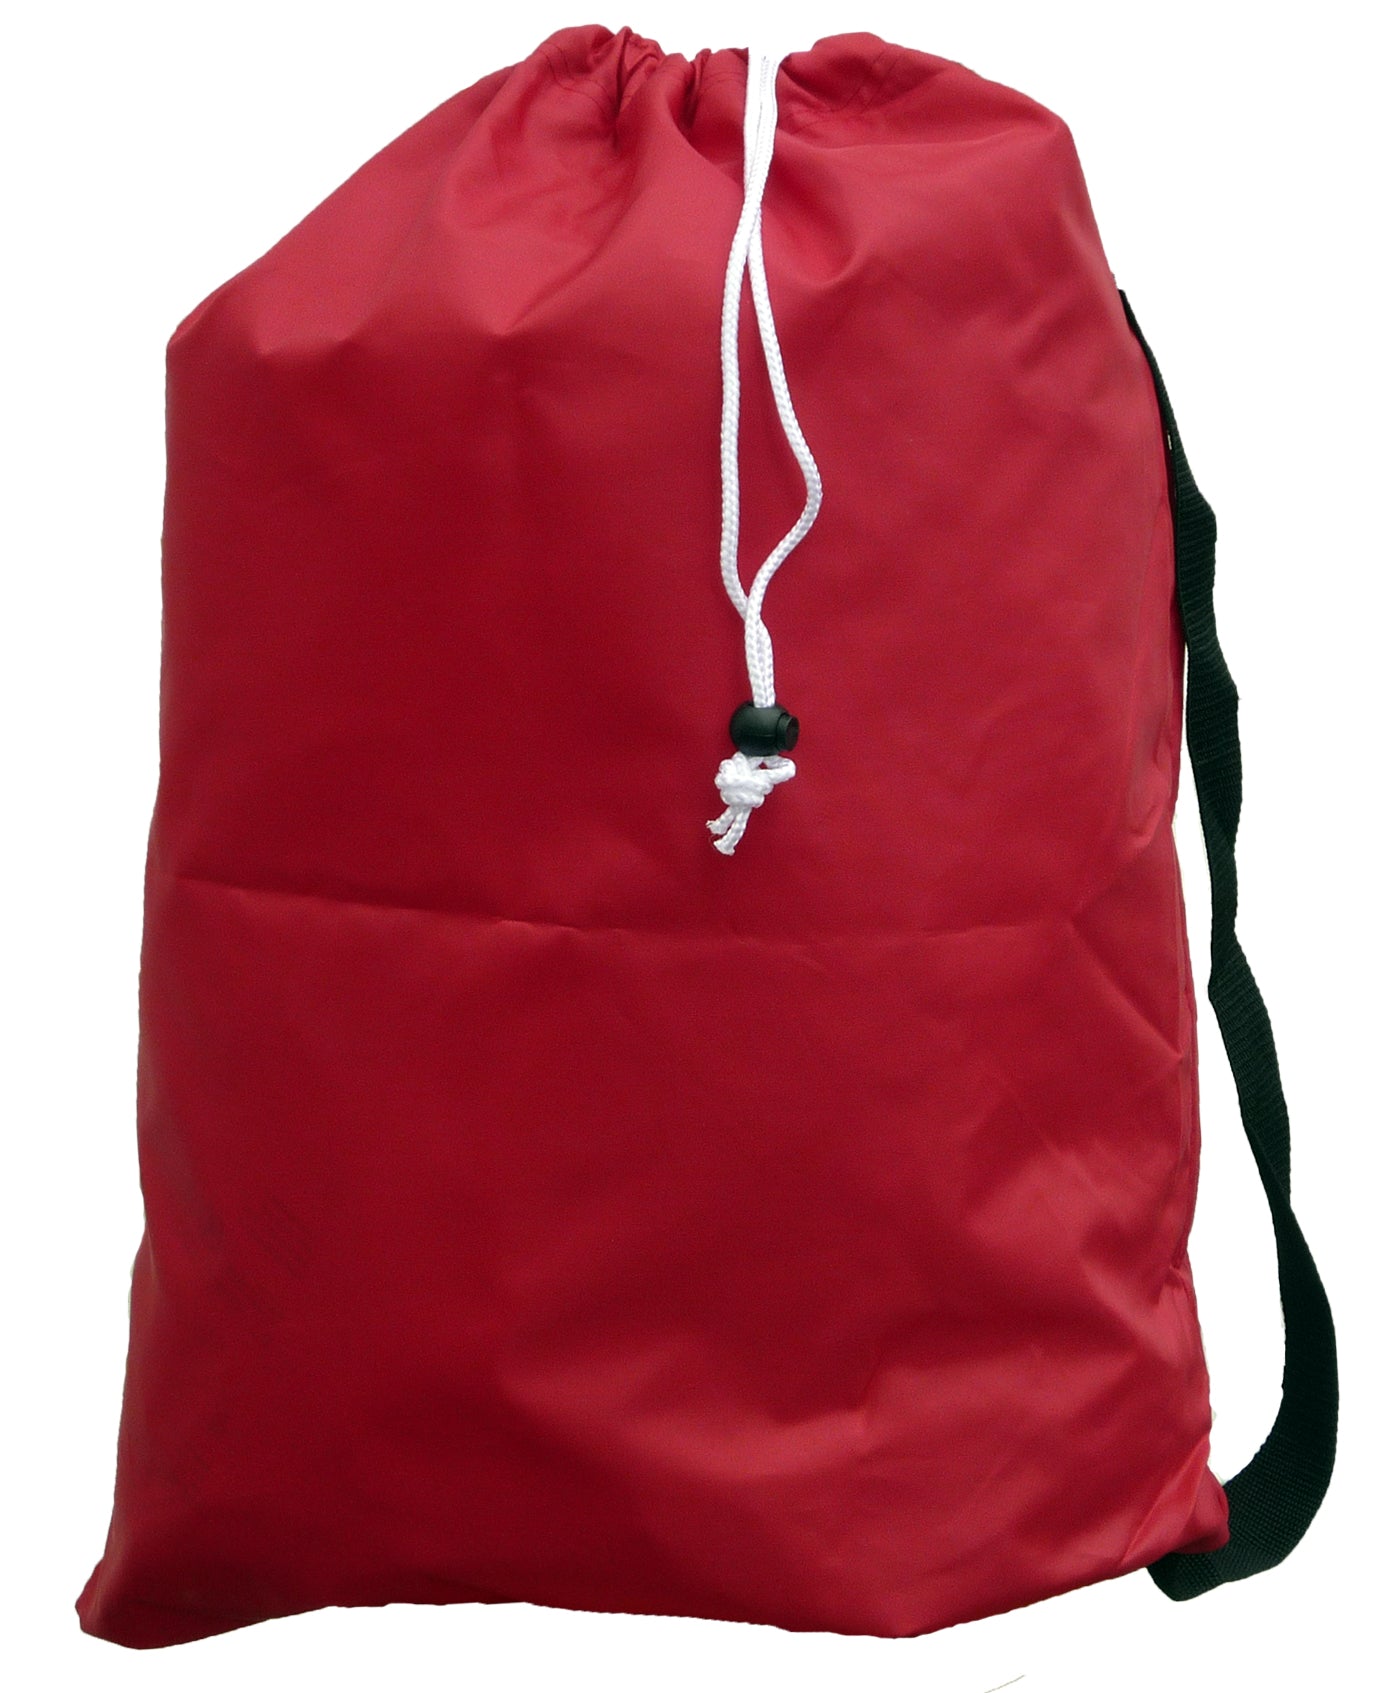 Medium Laundry Bag with Strap, Red